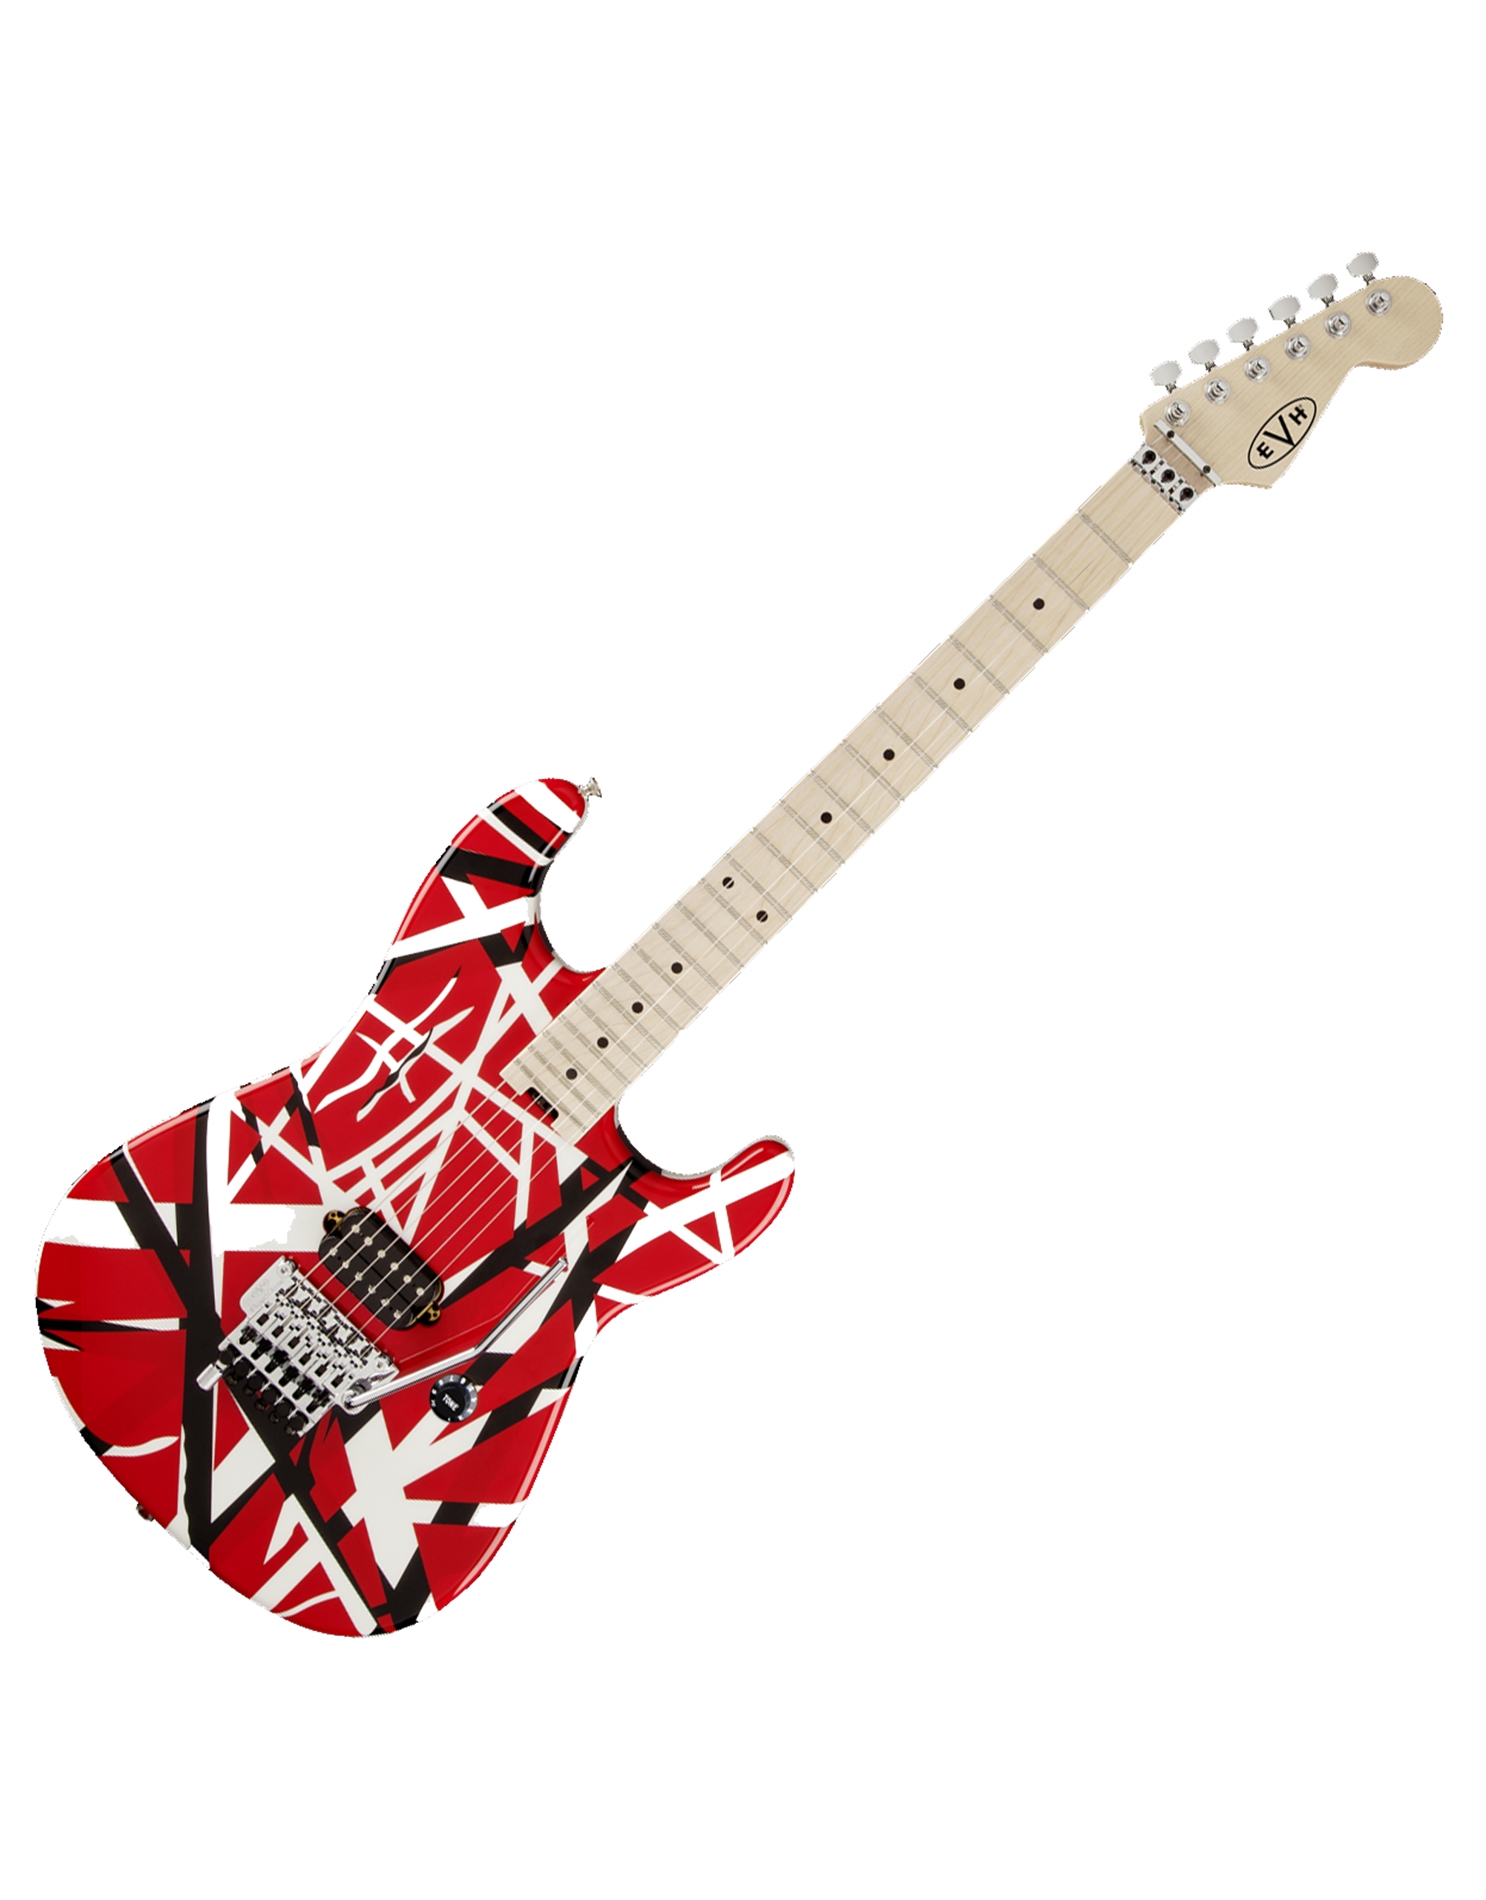 Stripes　Nakas　Electric　Red　Music　Electric　Black　Store　Series　Guitar　EVH　Guitars　Stripe　with